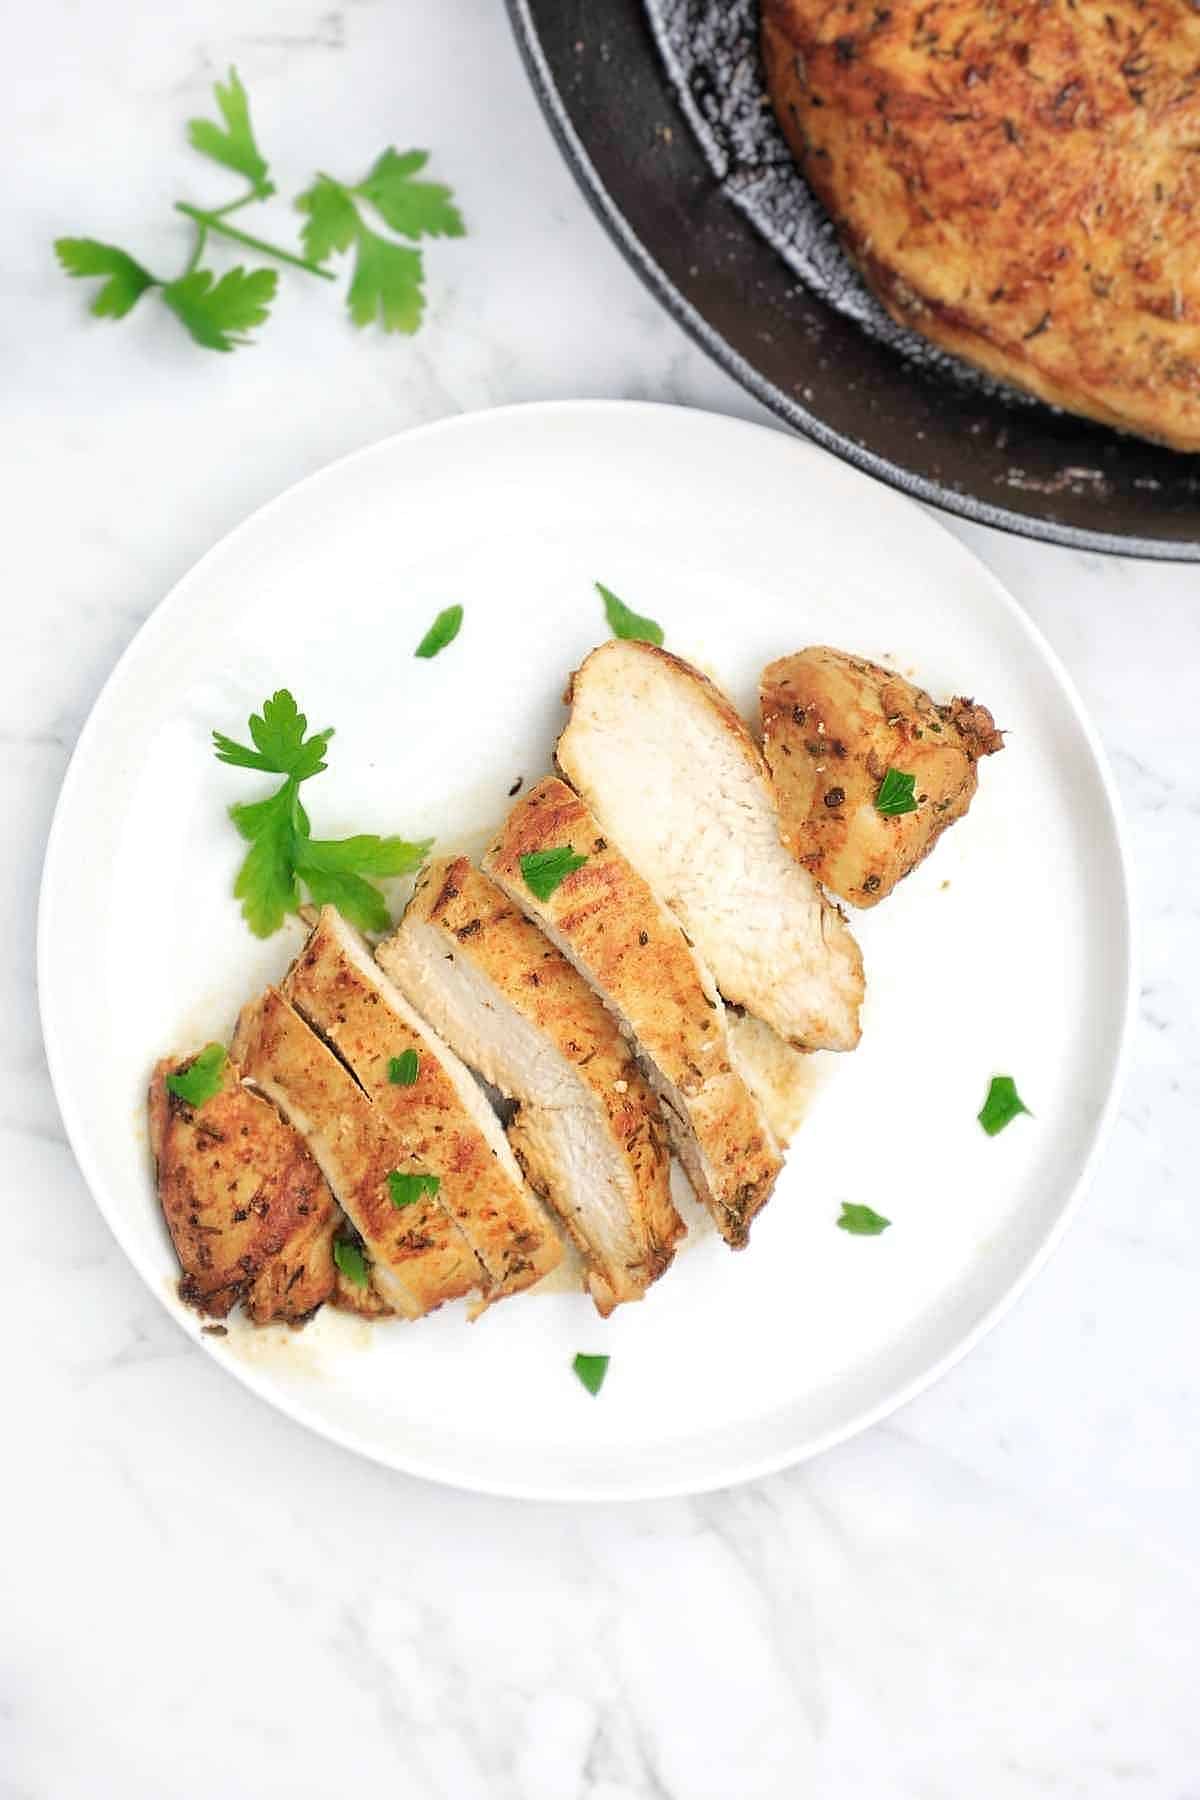 pan fried chicken breast served on a white plate.